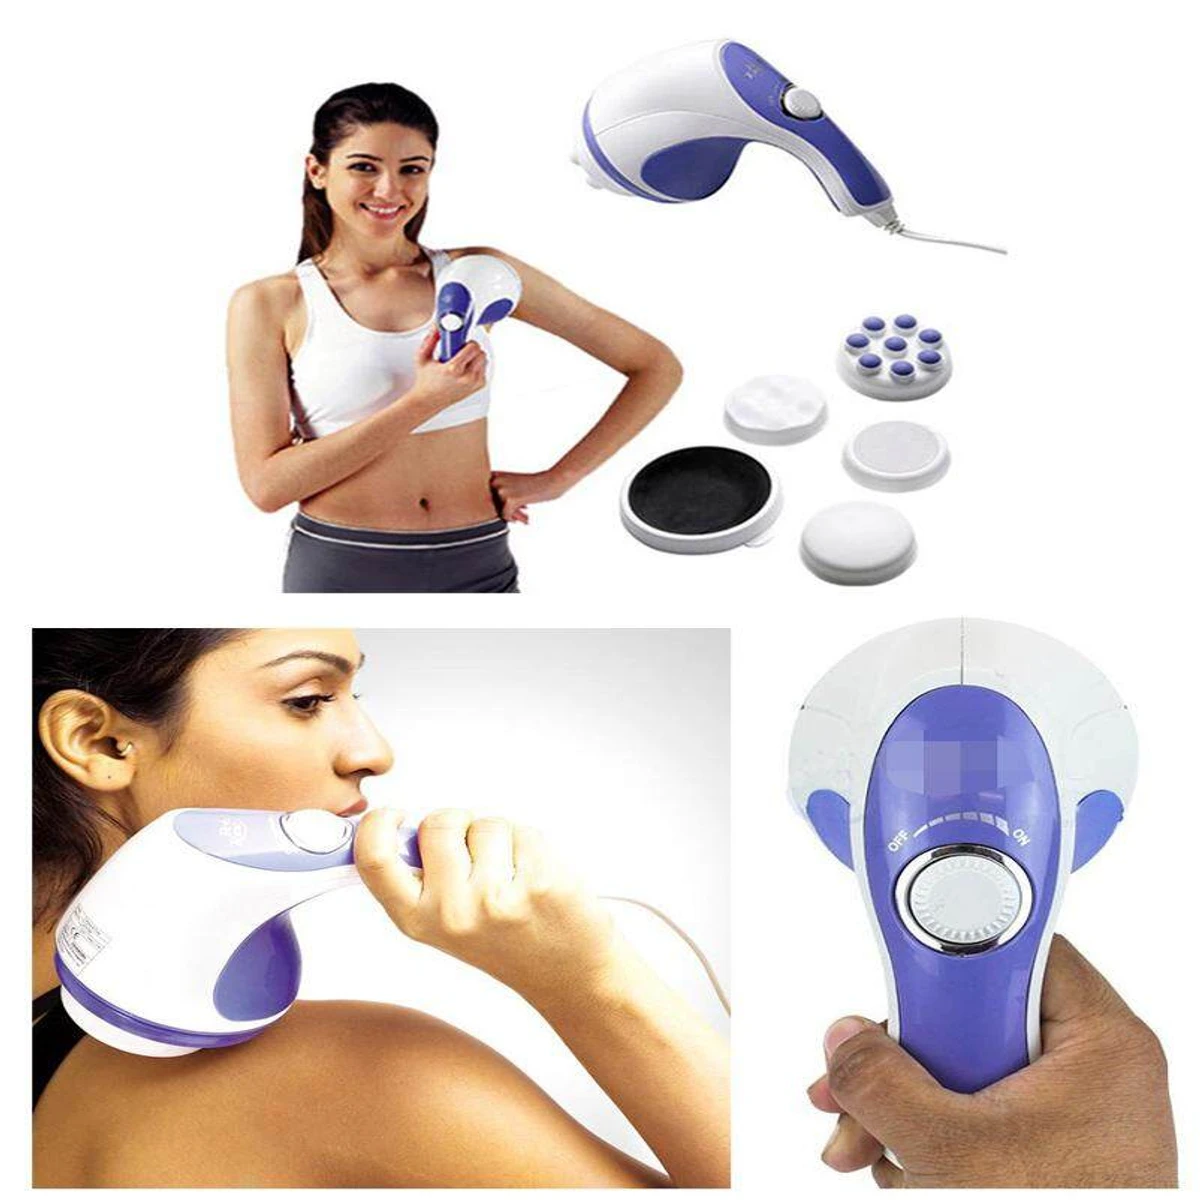 5 in 1 Full Relax Tone Spin Body Massager 3D Electric Full Body Slimming Massager Roller Cellulite Massage Smarter Device